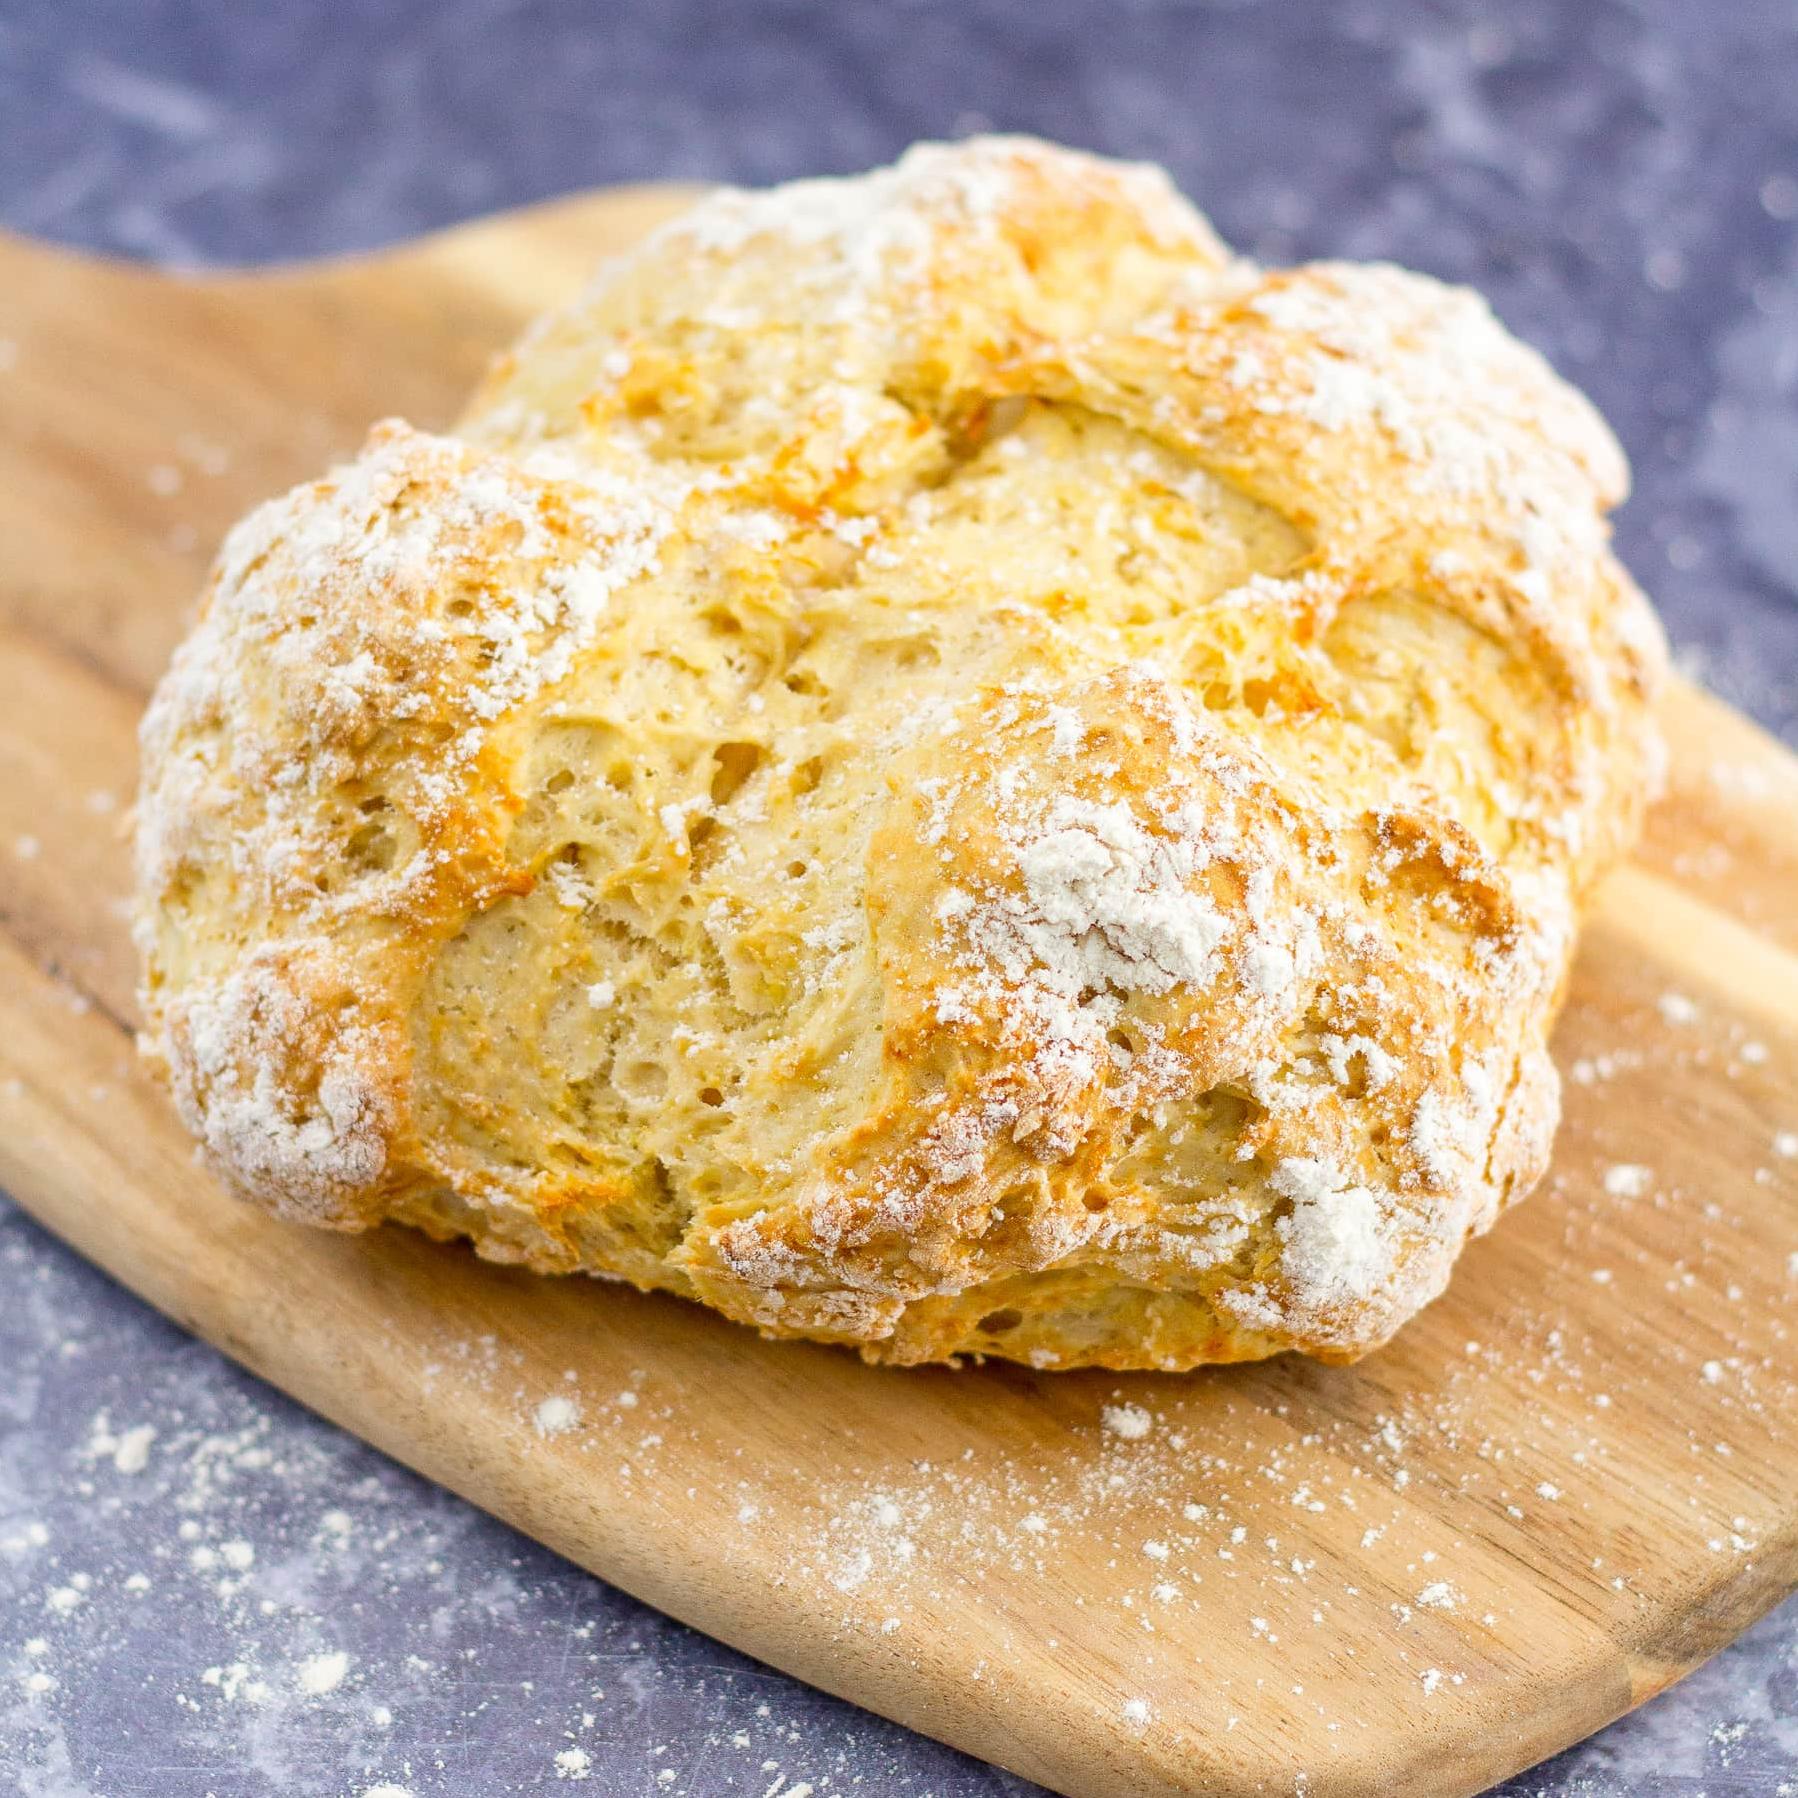  Simple ingredients make for delicious results, as seen in this recipe for Irish soda bread.